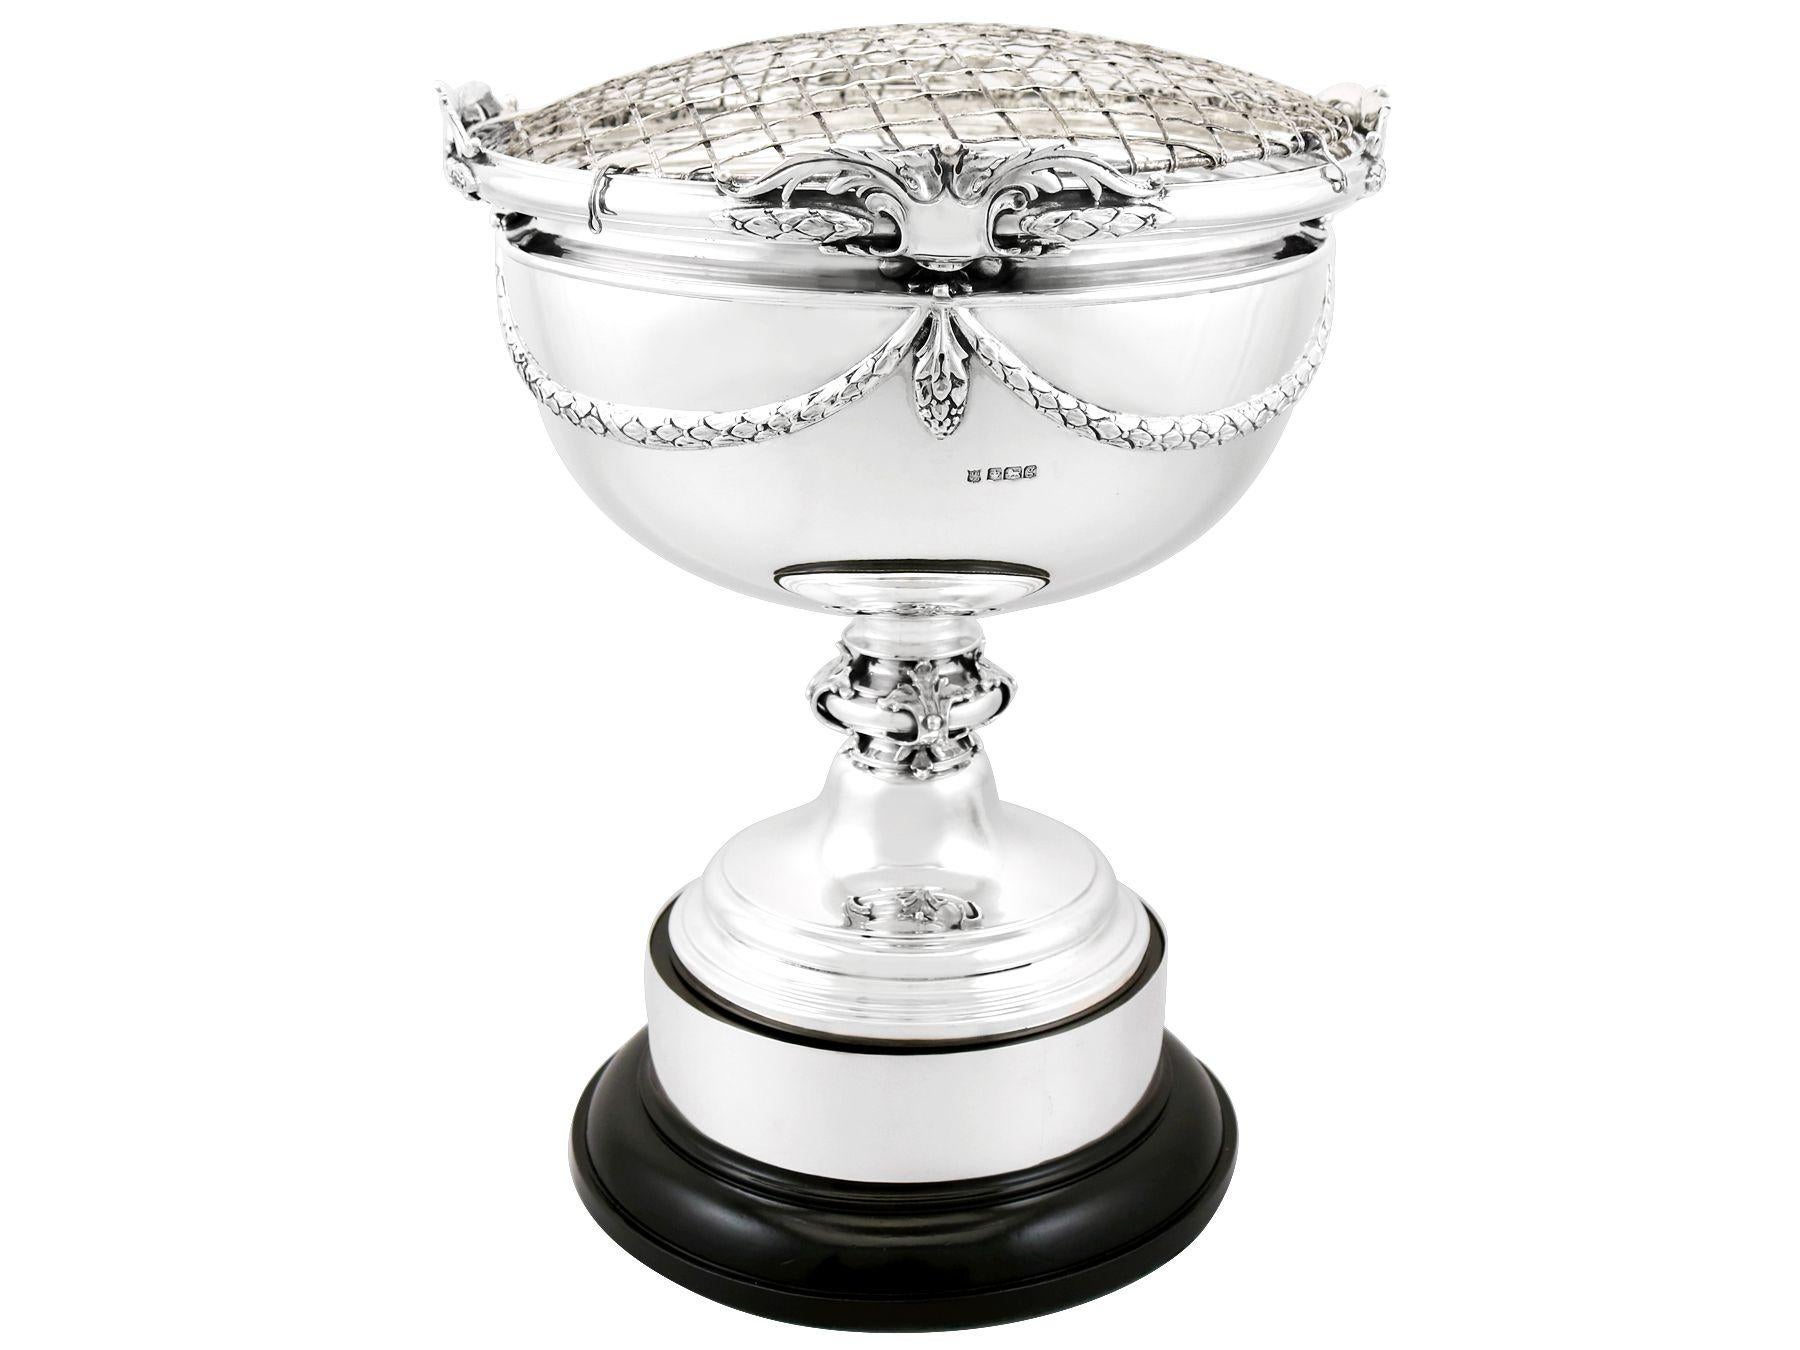 An exceptional, fine and impressive, antique George V English sterling silver bowl on plinth by James Deakin & Sons; an addition to our ornamental silverware collection.

This exceptional antique George V sterling silver bowl has a circular